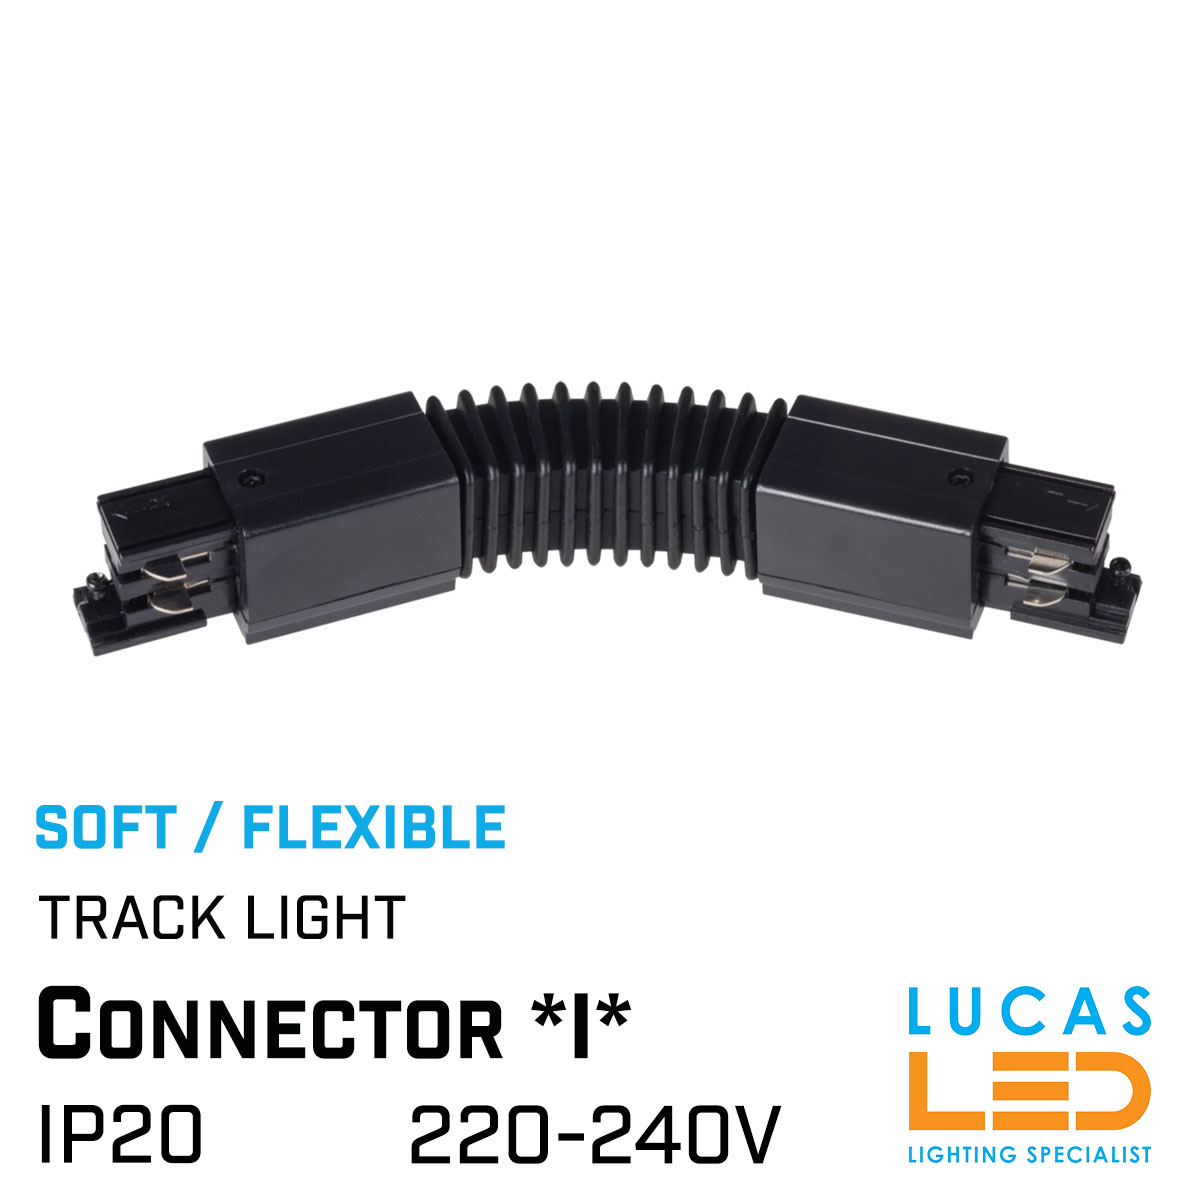 CONNECTOR - I - FLEXIBLE - for Rail - LED Track Lighting system - 3-phase - 3 circuit - Black